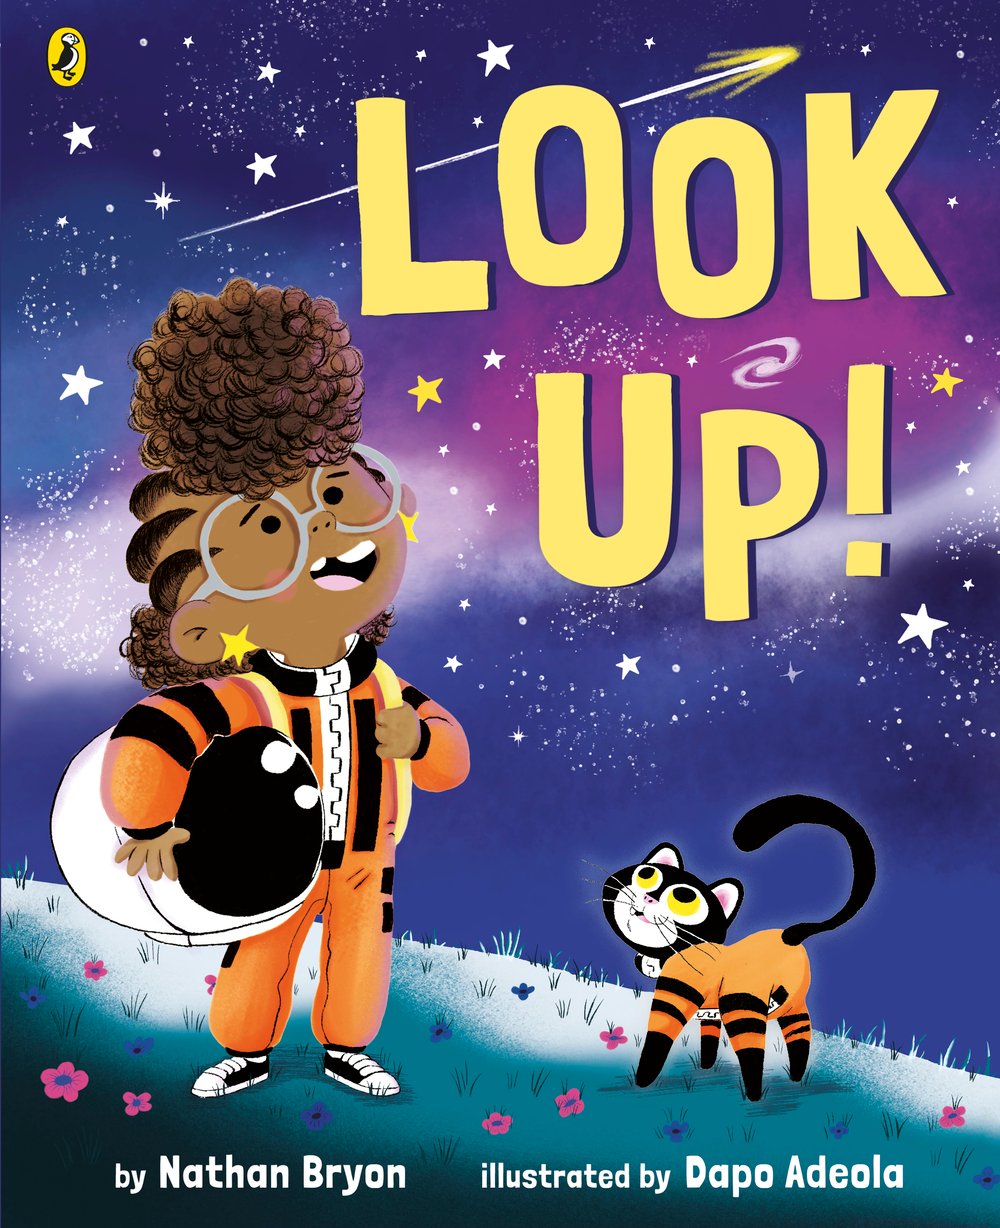 Image of Signed copy of Look Up